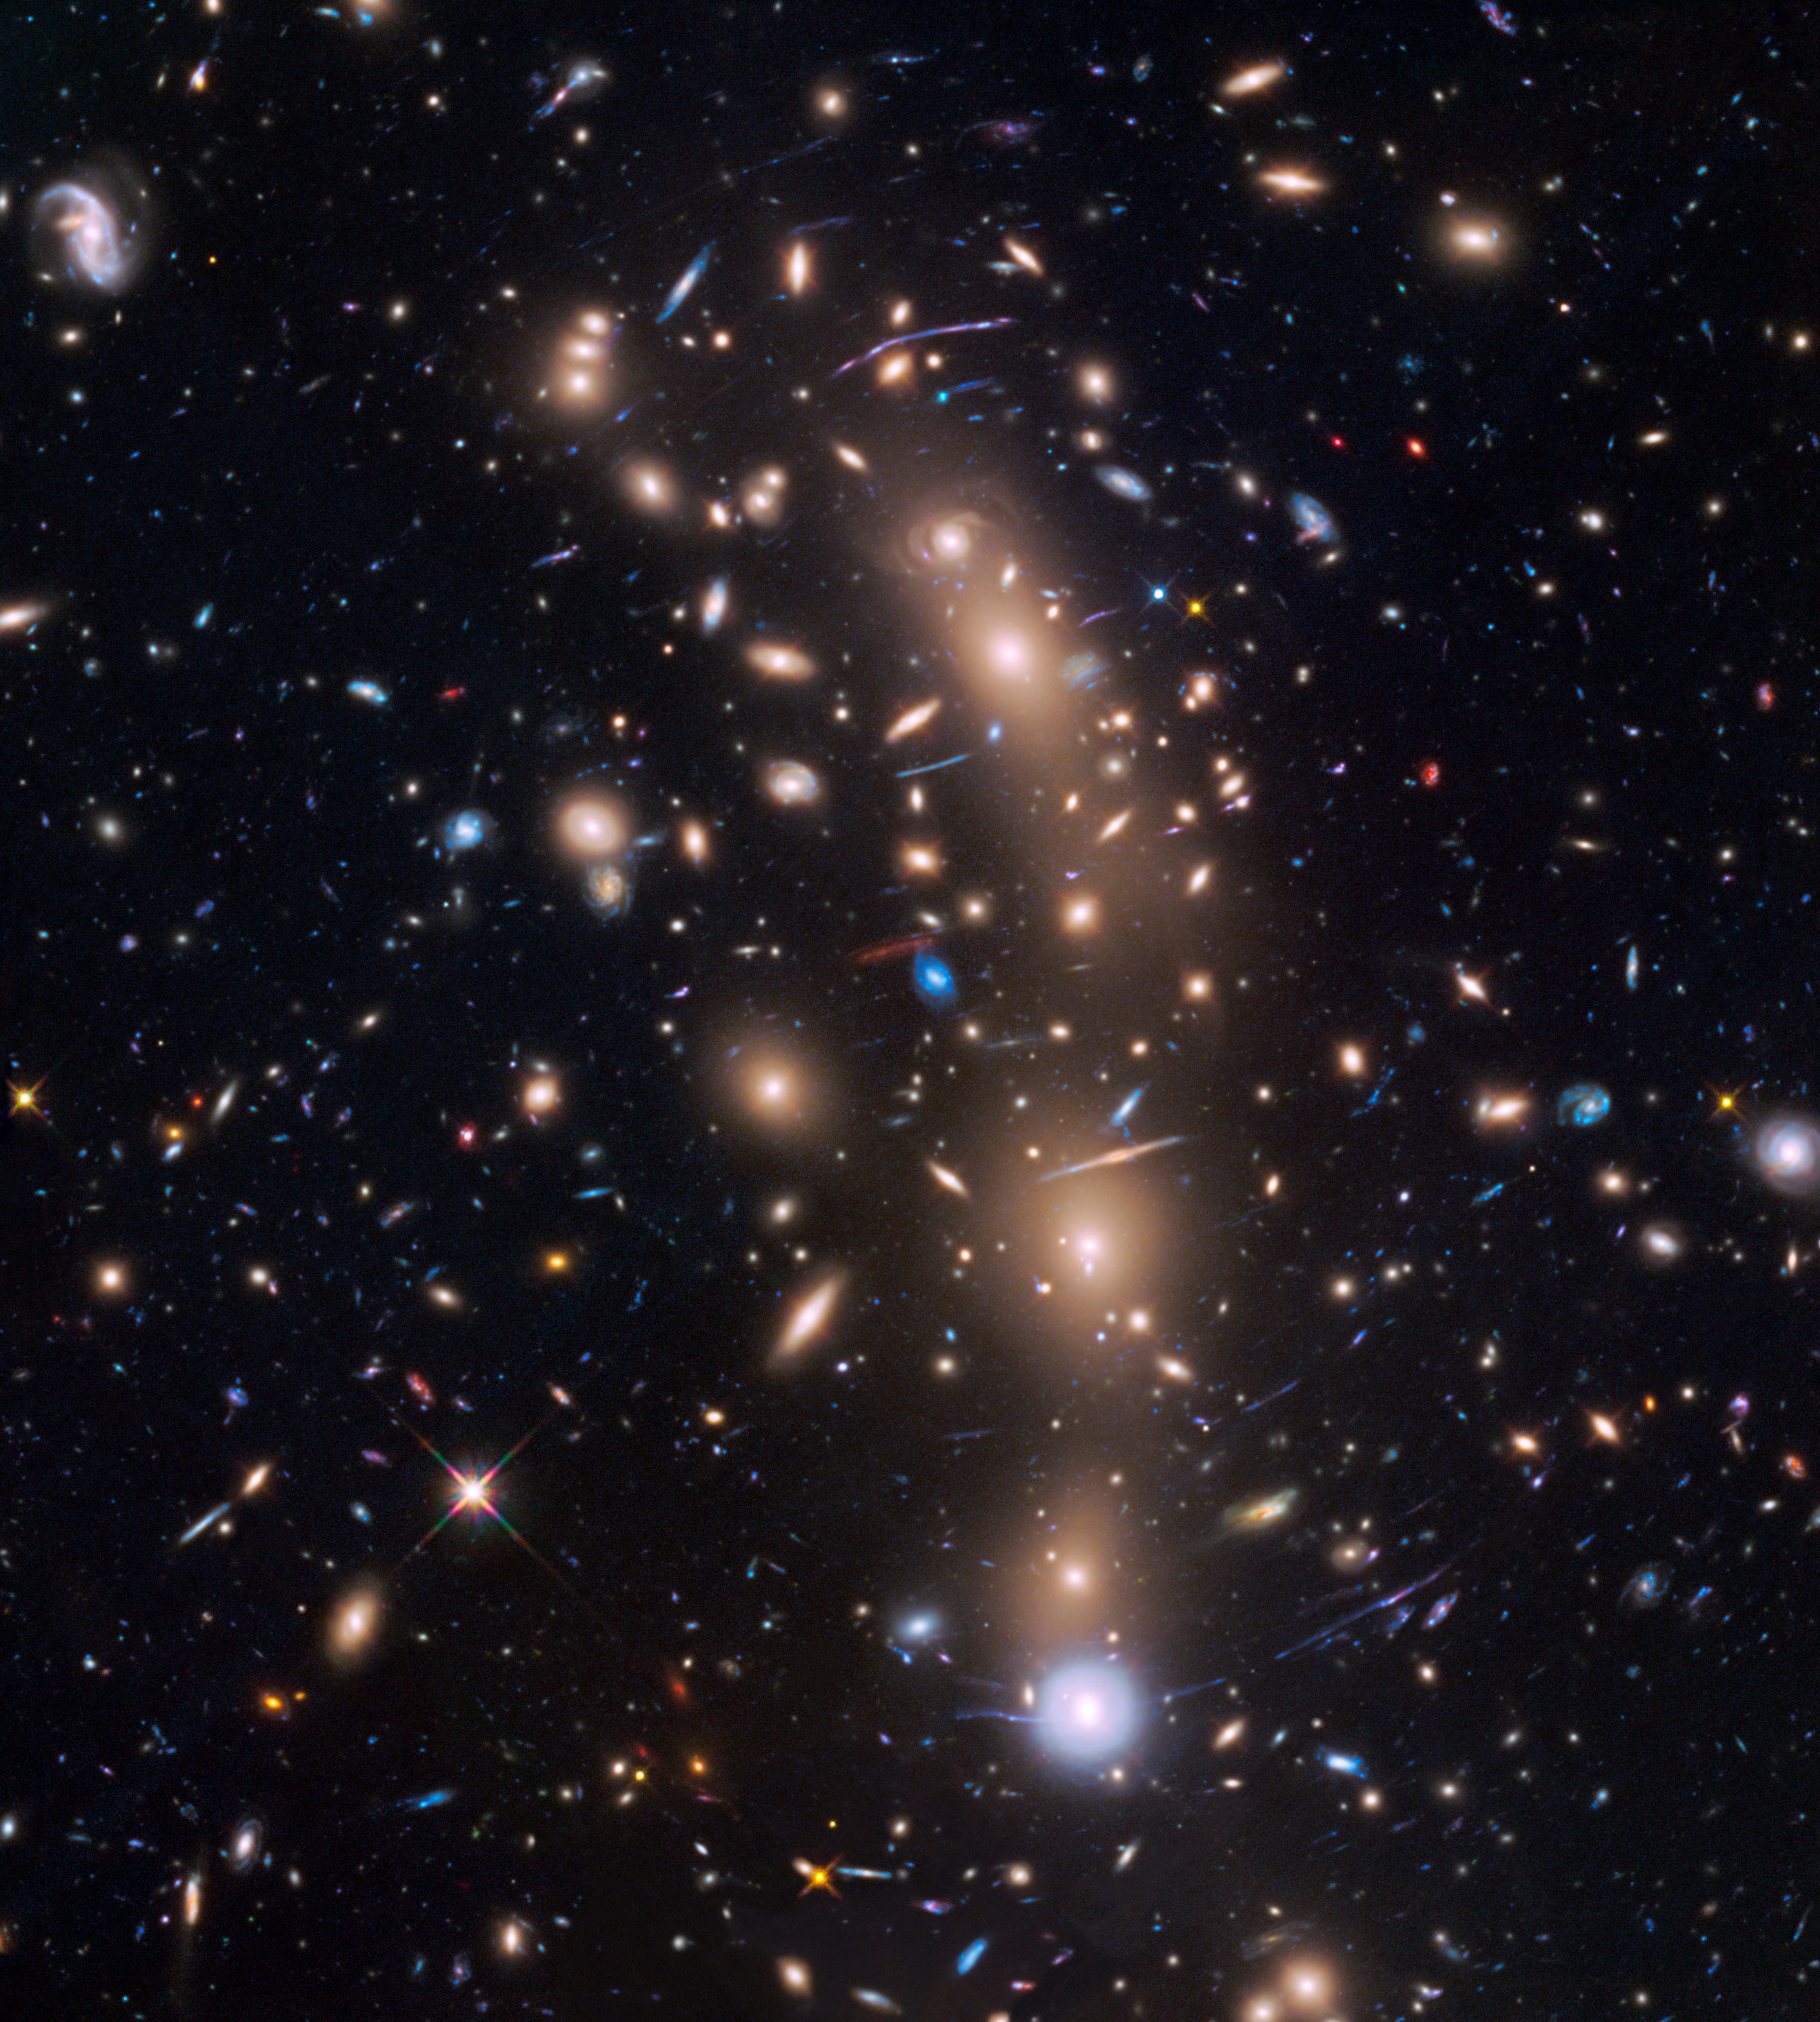 A cluster of yellow galaxies with hundreds of background galaxies. The image include arcs that are distorted images of background galaxies.